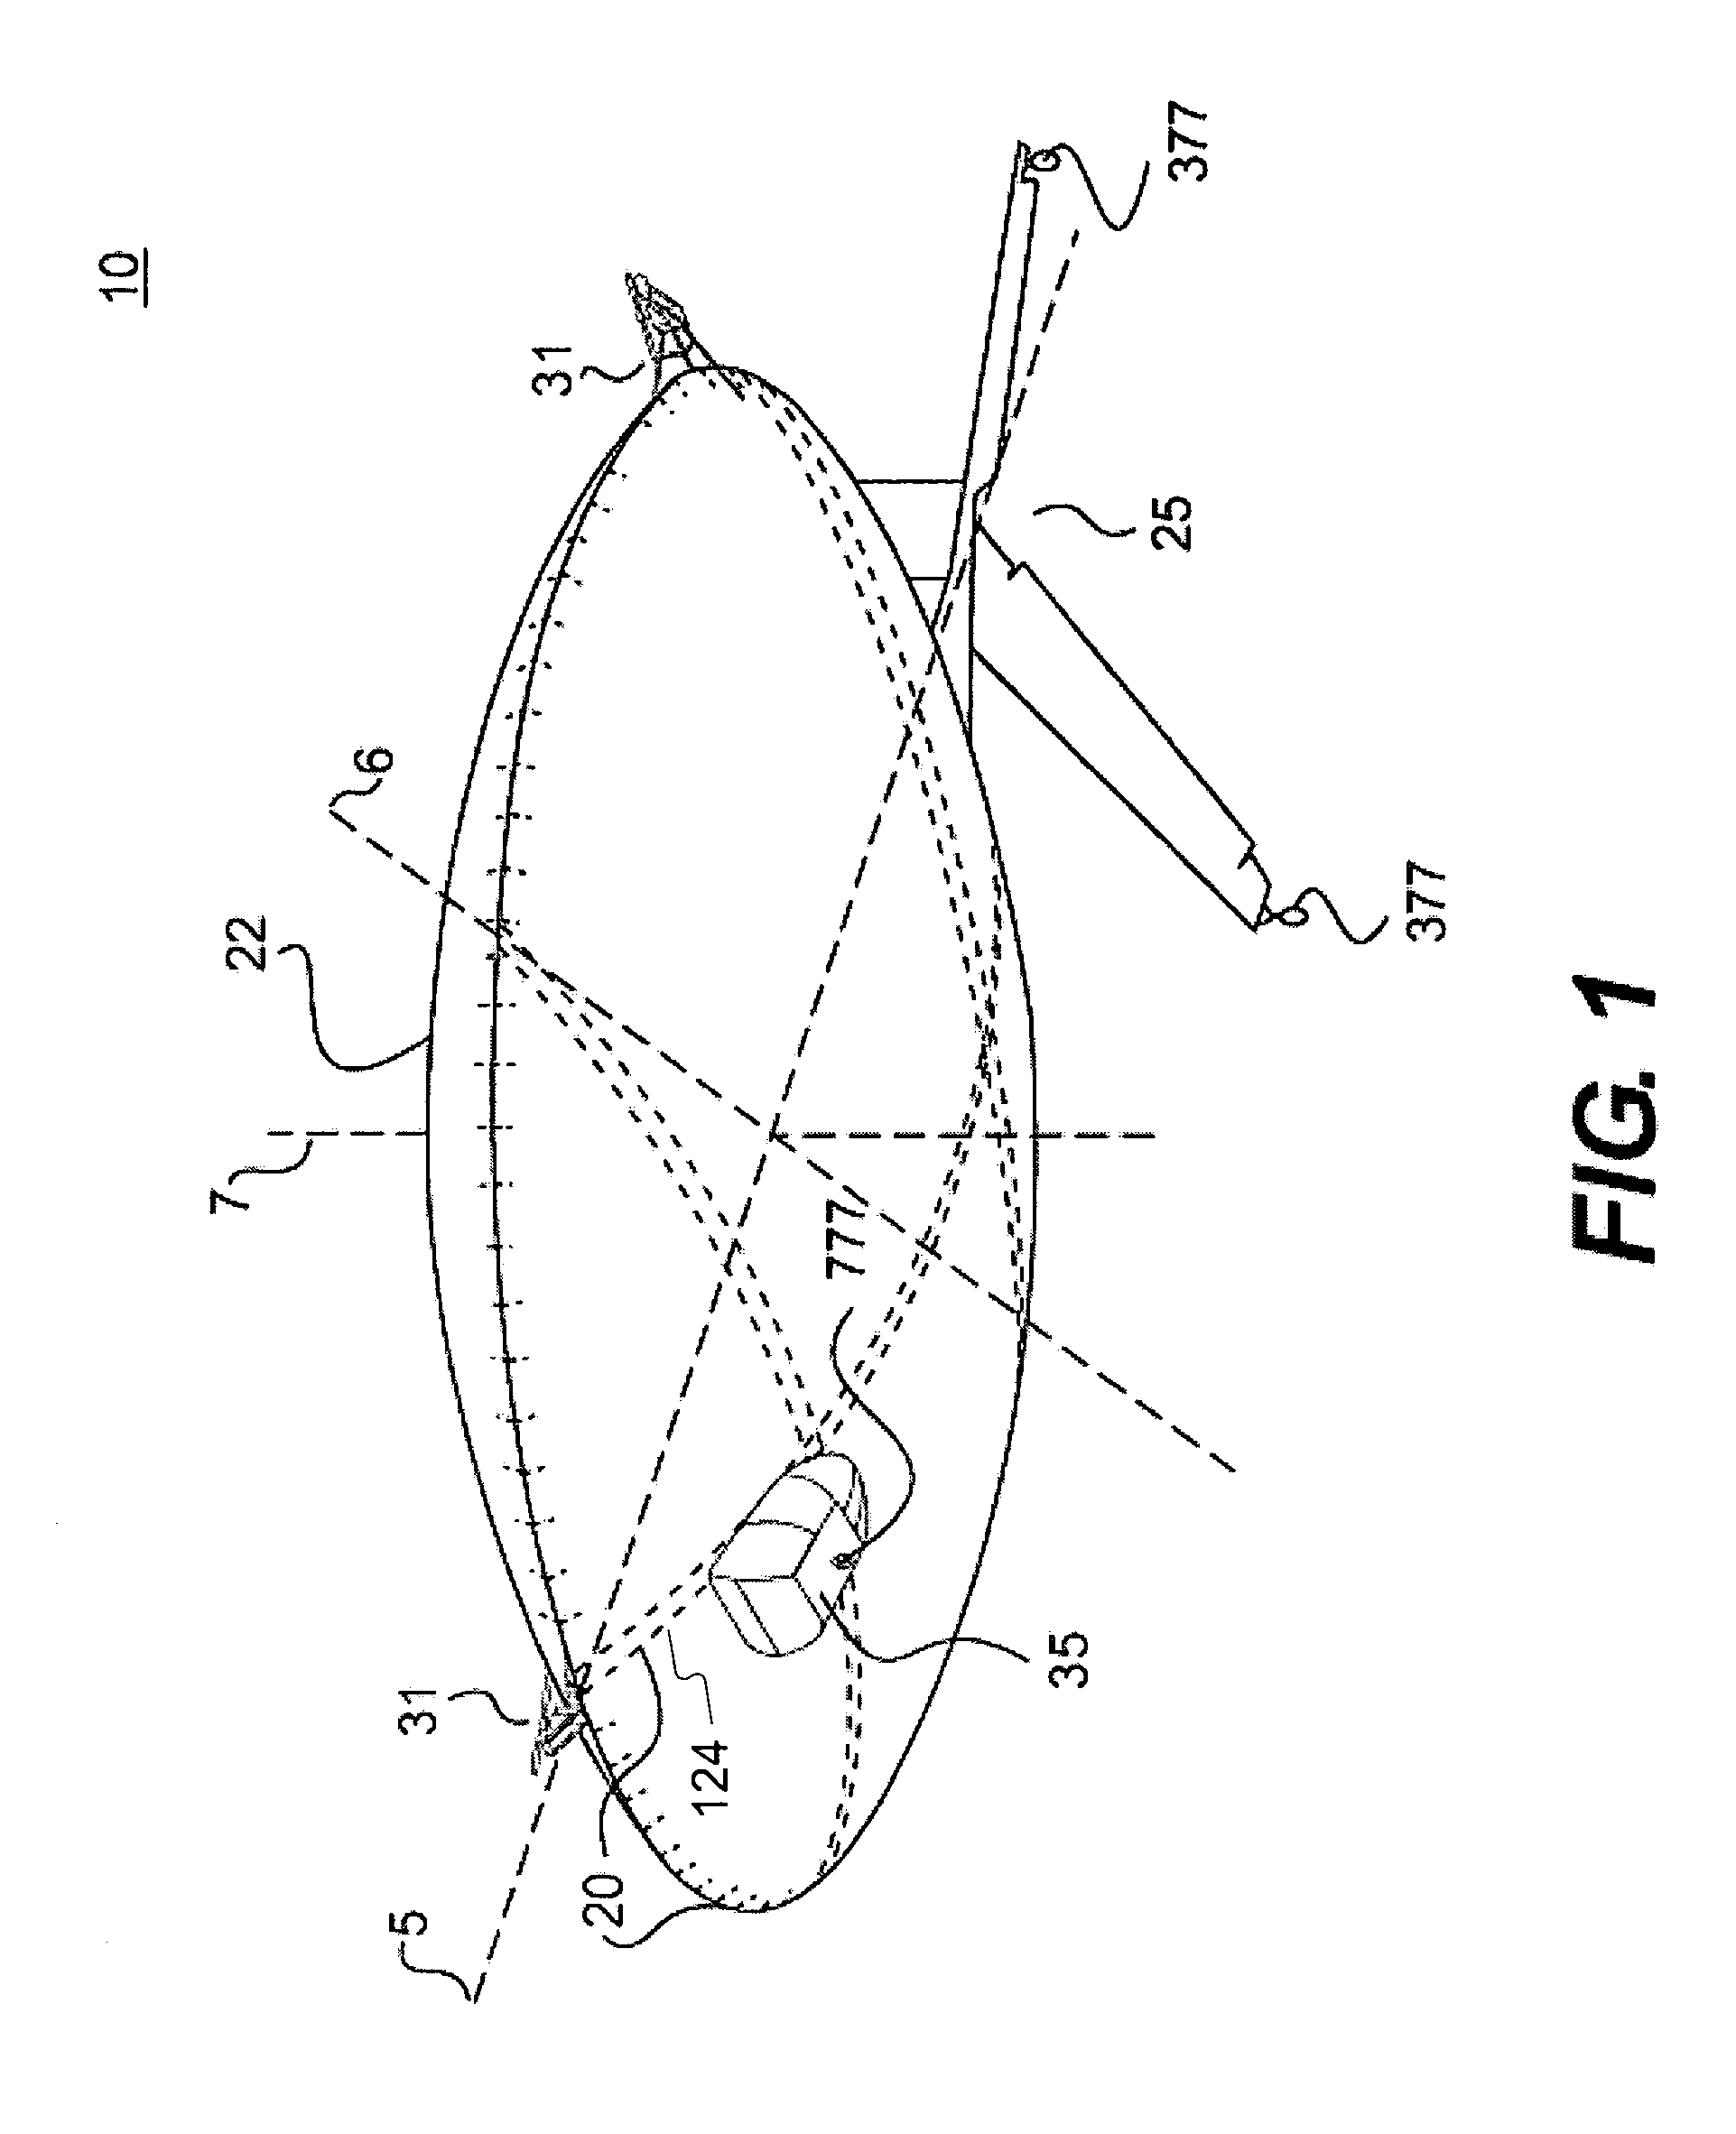 Lenticular airship and associated controls